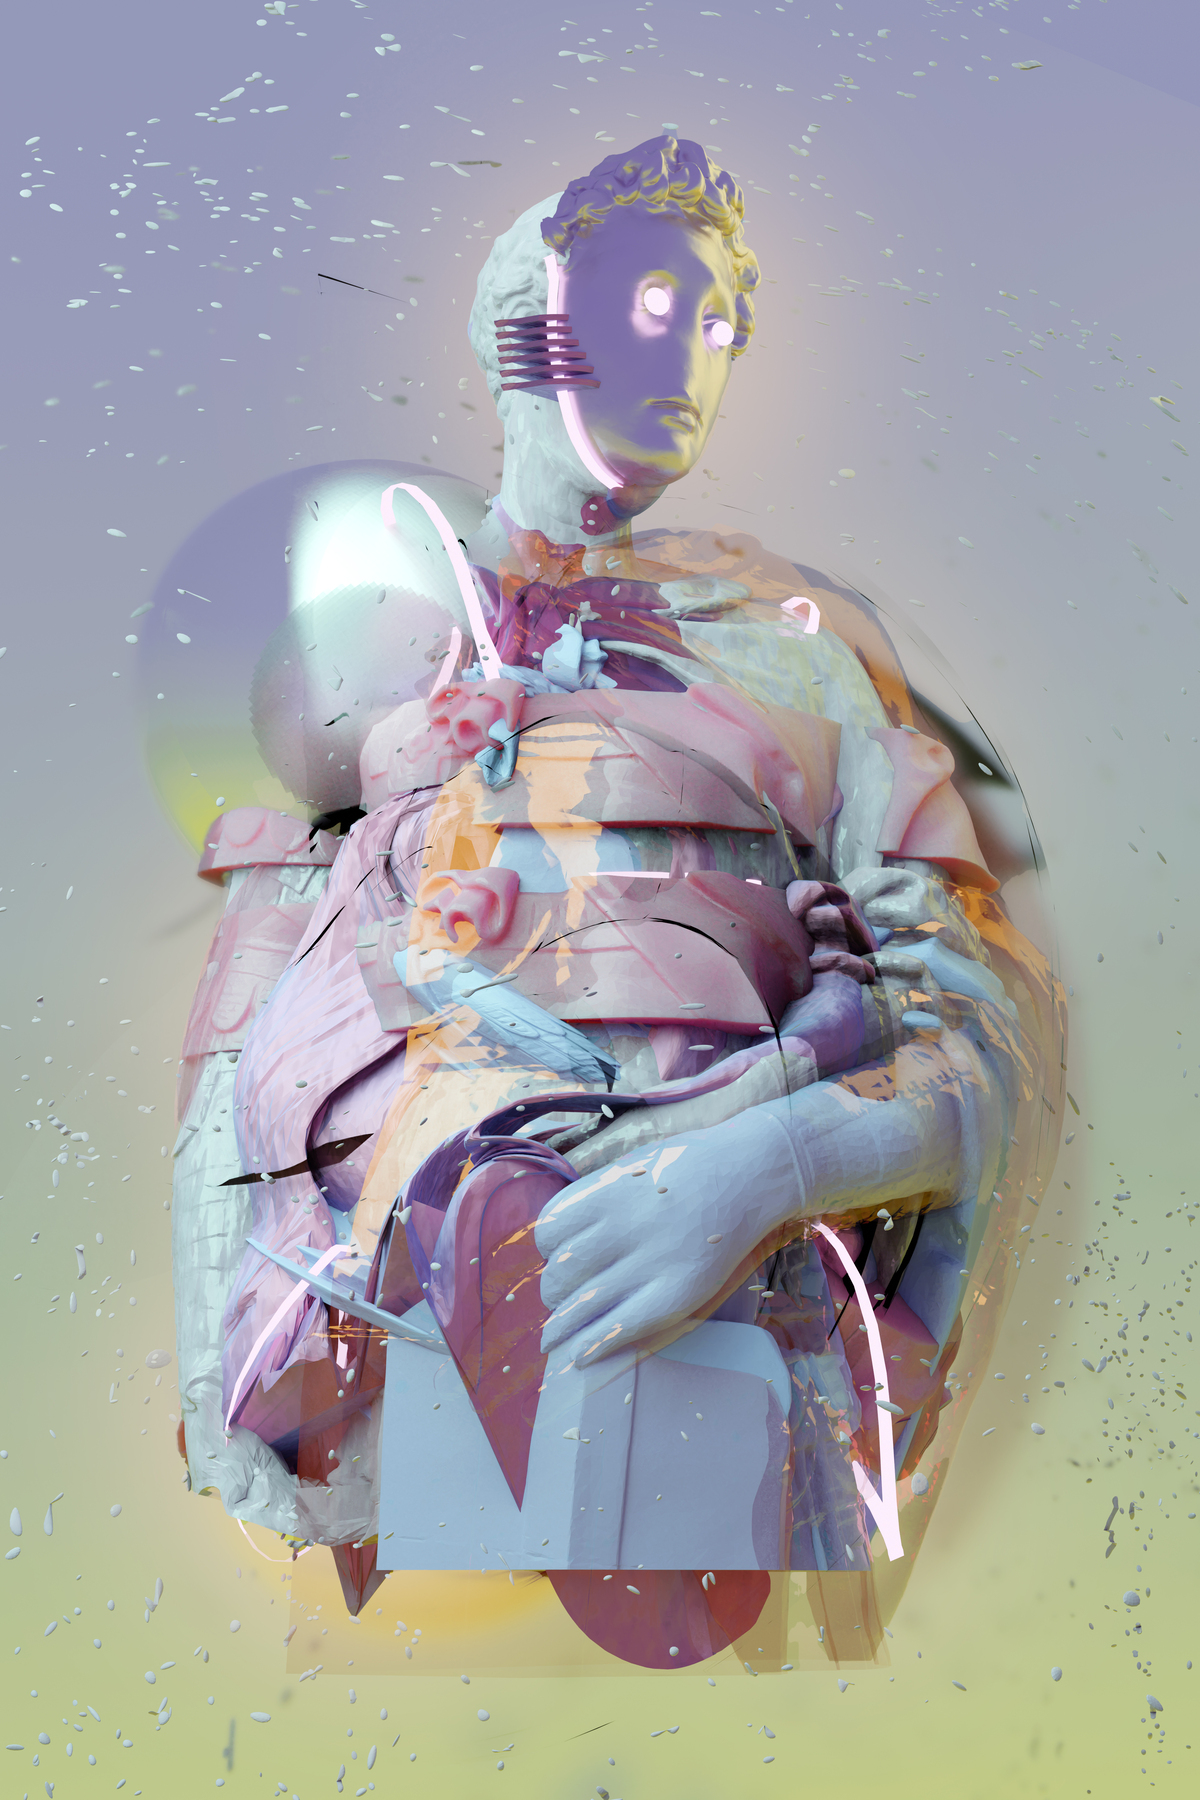 A digital image of a human-machine hybrid creature in shades of pastel blue and purple